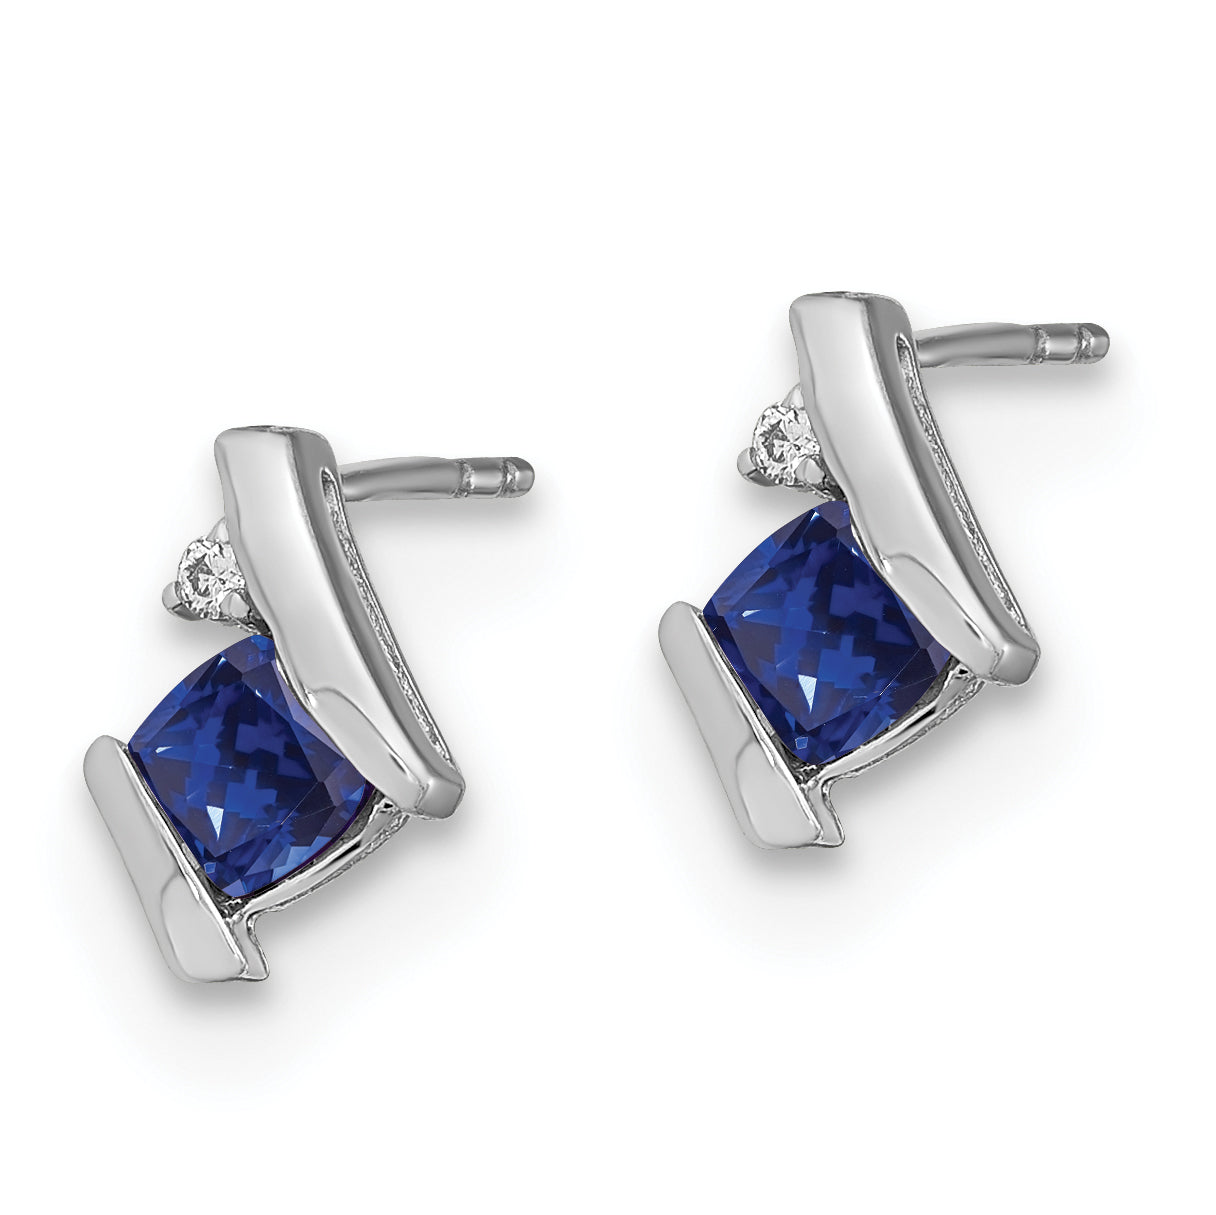 Sterling Silver Antique Cushion Cr. Sapphire and Diamond Earrings